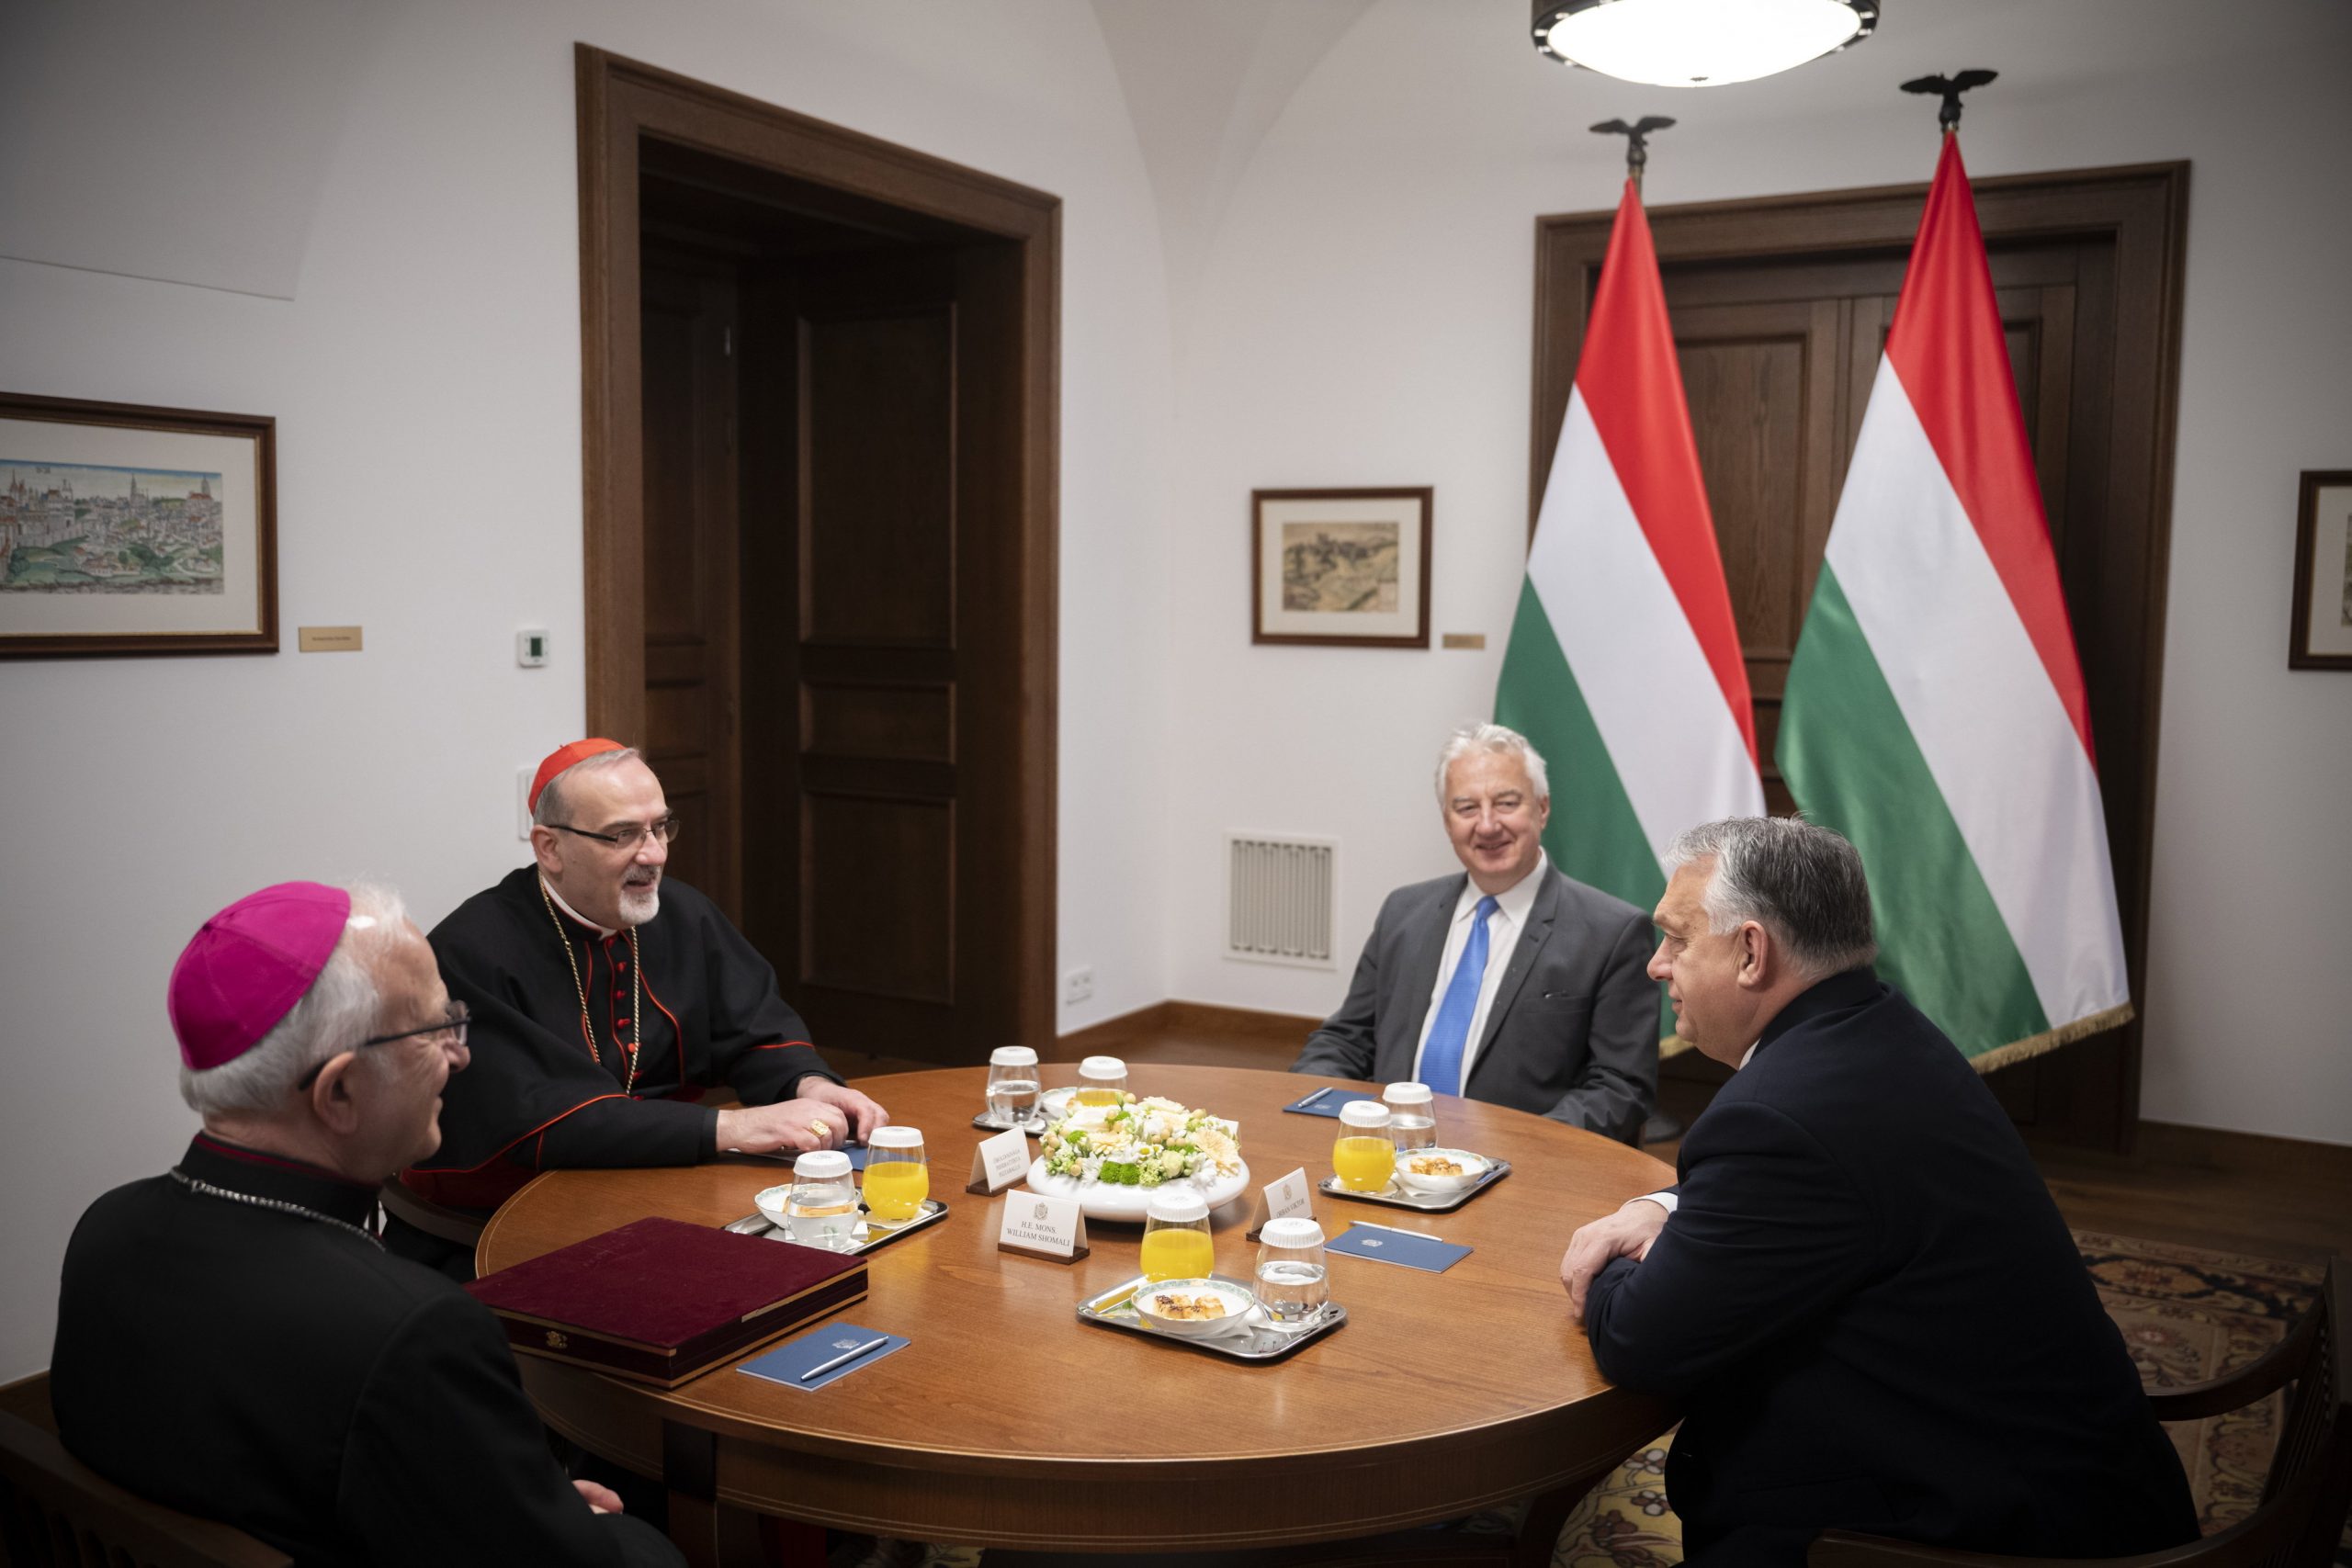 Viktor Orbán Discusses the Survival of Christianity in the Holy Land